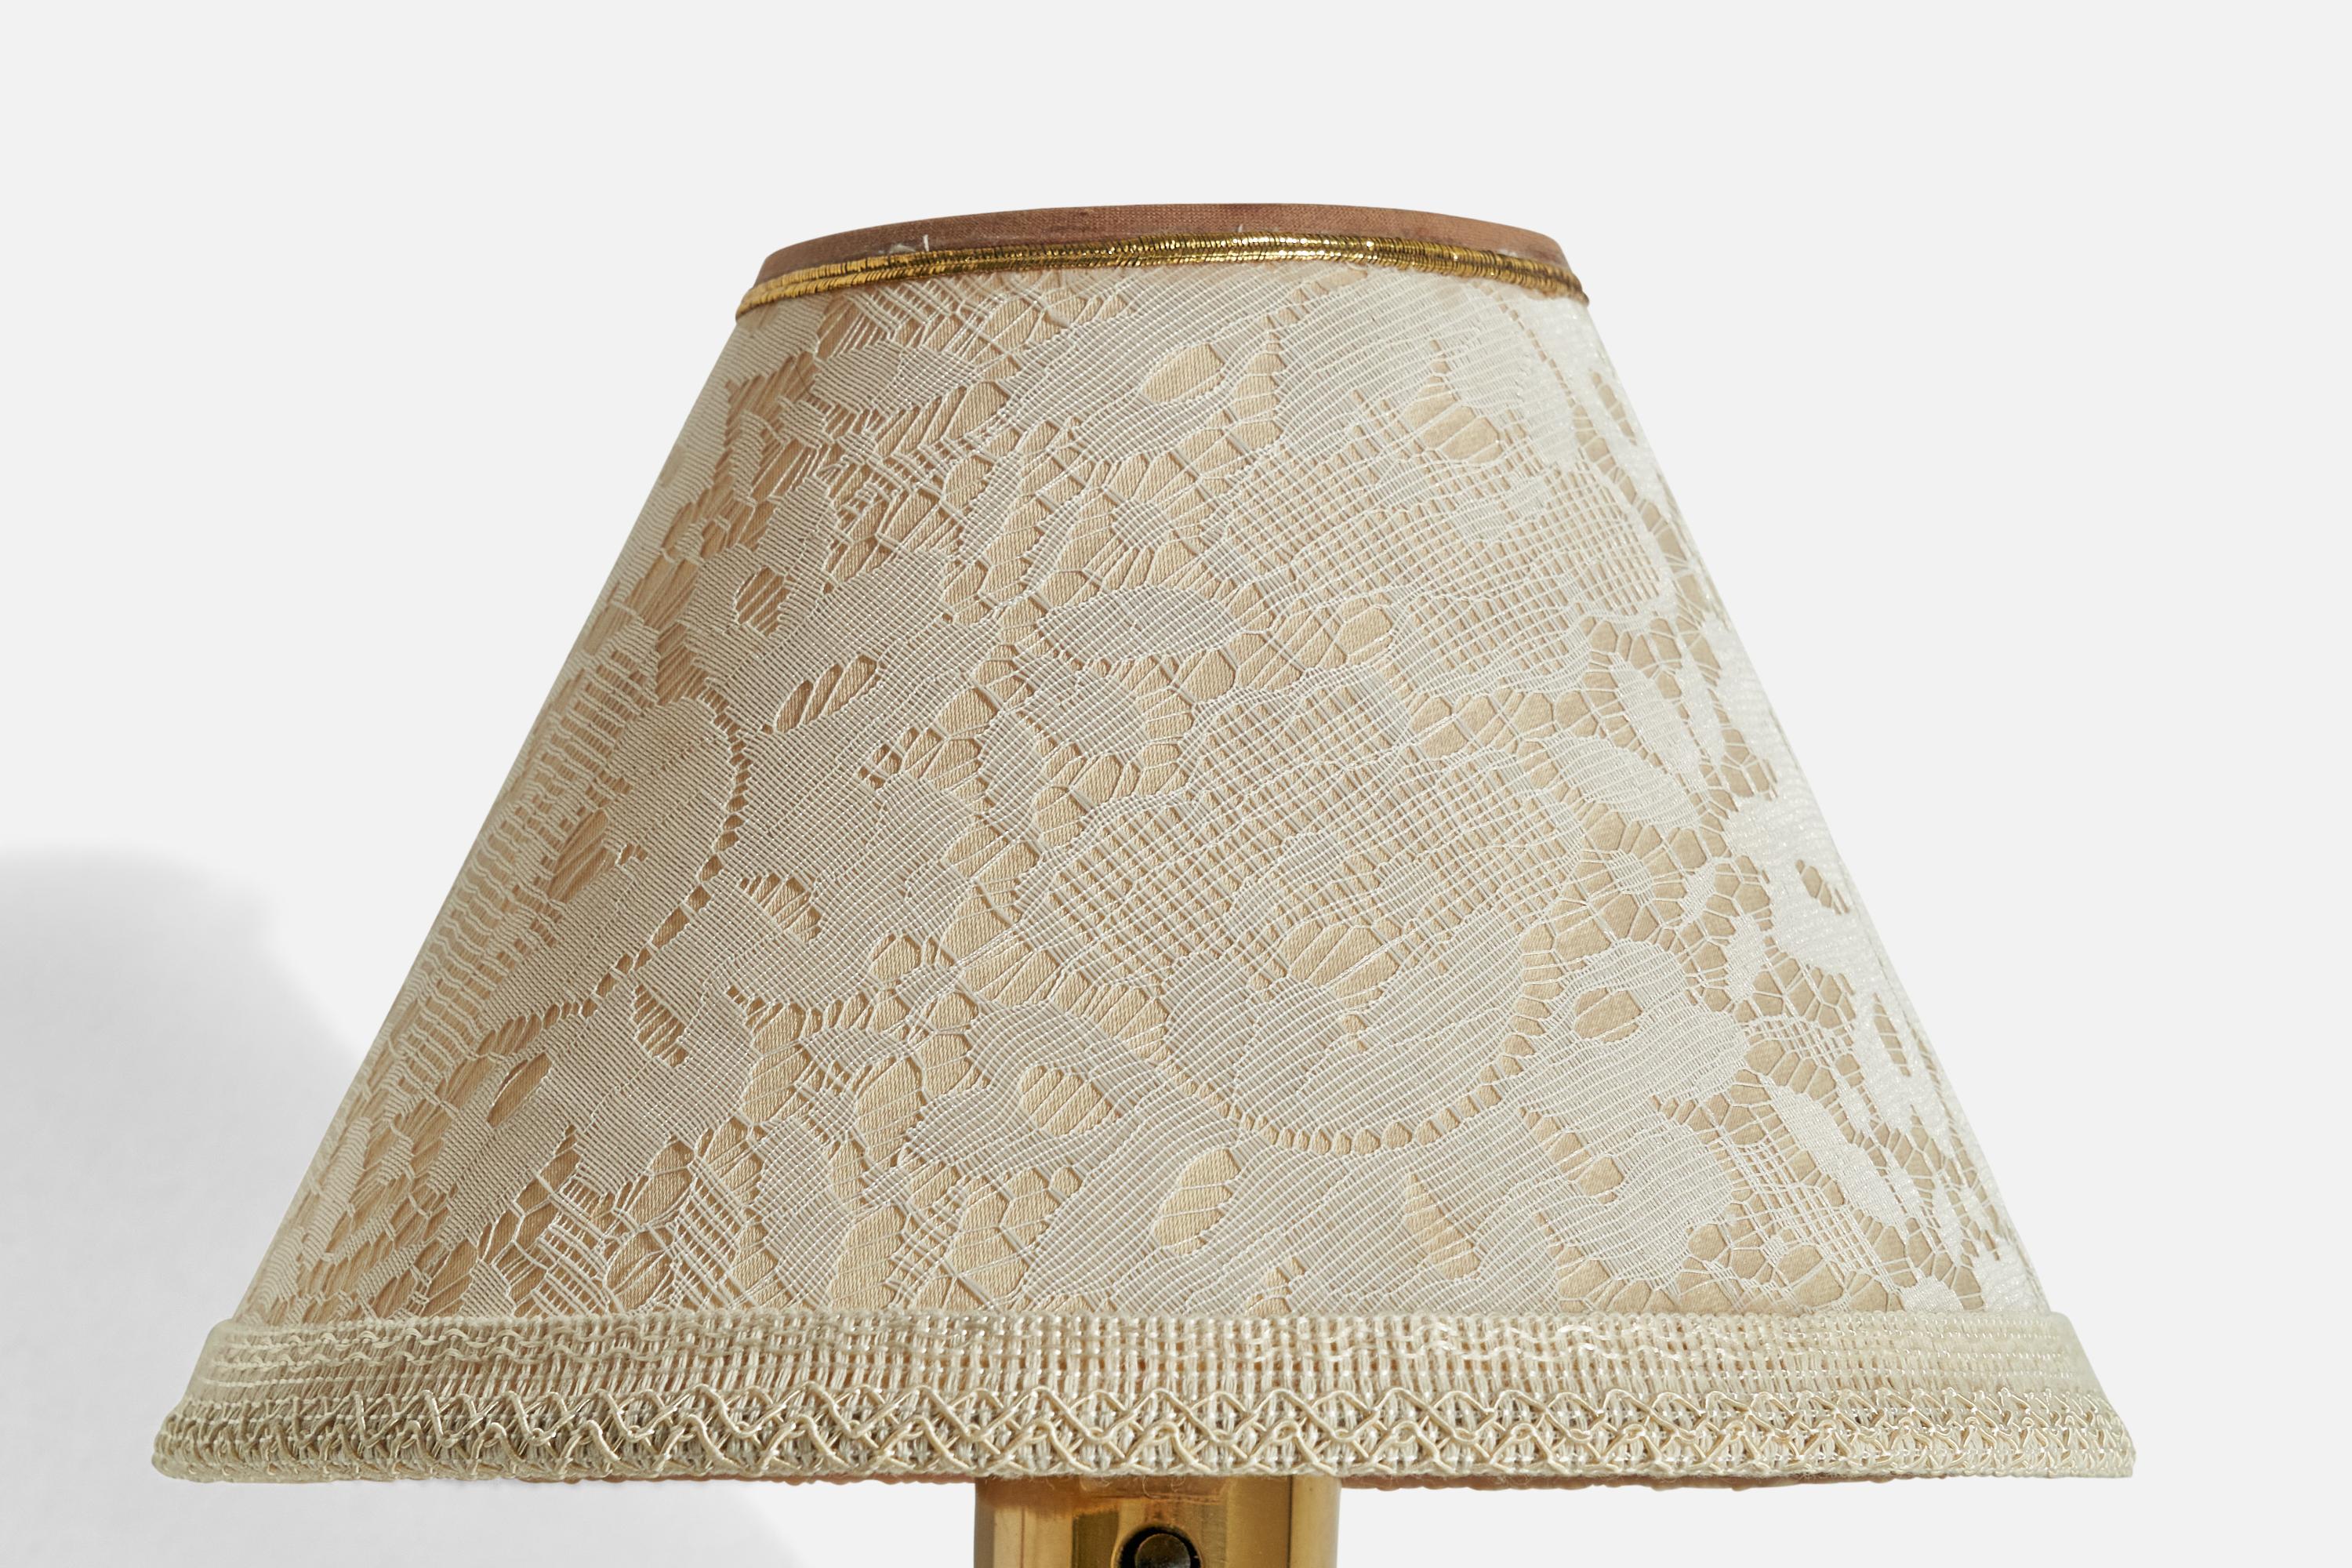 A pair of off-white embroidery fabric and brass wall lights designed and produced in Sweden, 1960s.

Overall Dimensions (inches): 11.2” H x 9” W x 11” D
Back Plate Dimensions (inches): 3.9” Diameter x 0.75” Depth
Bulb Specifications: E-26